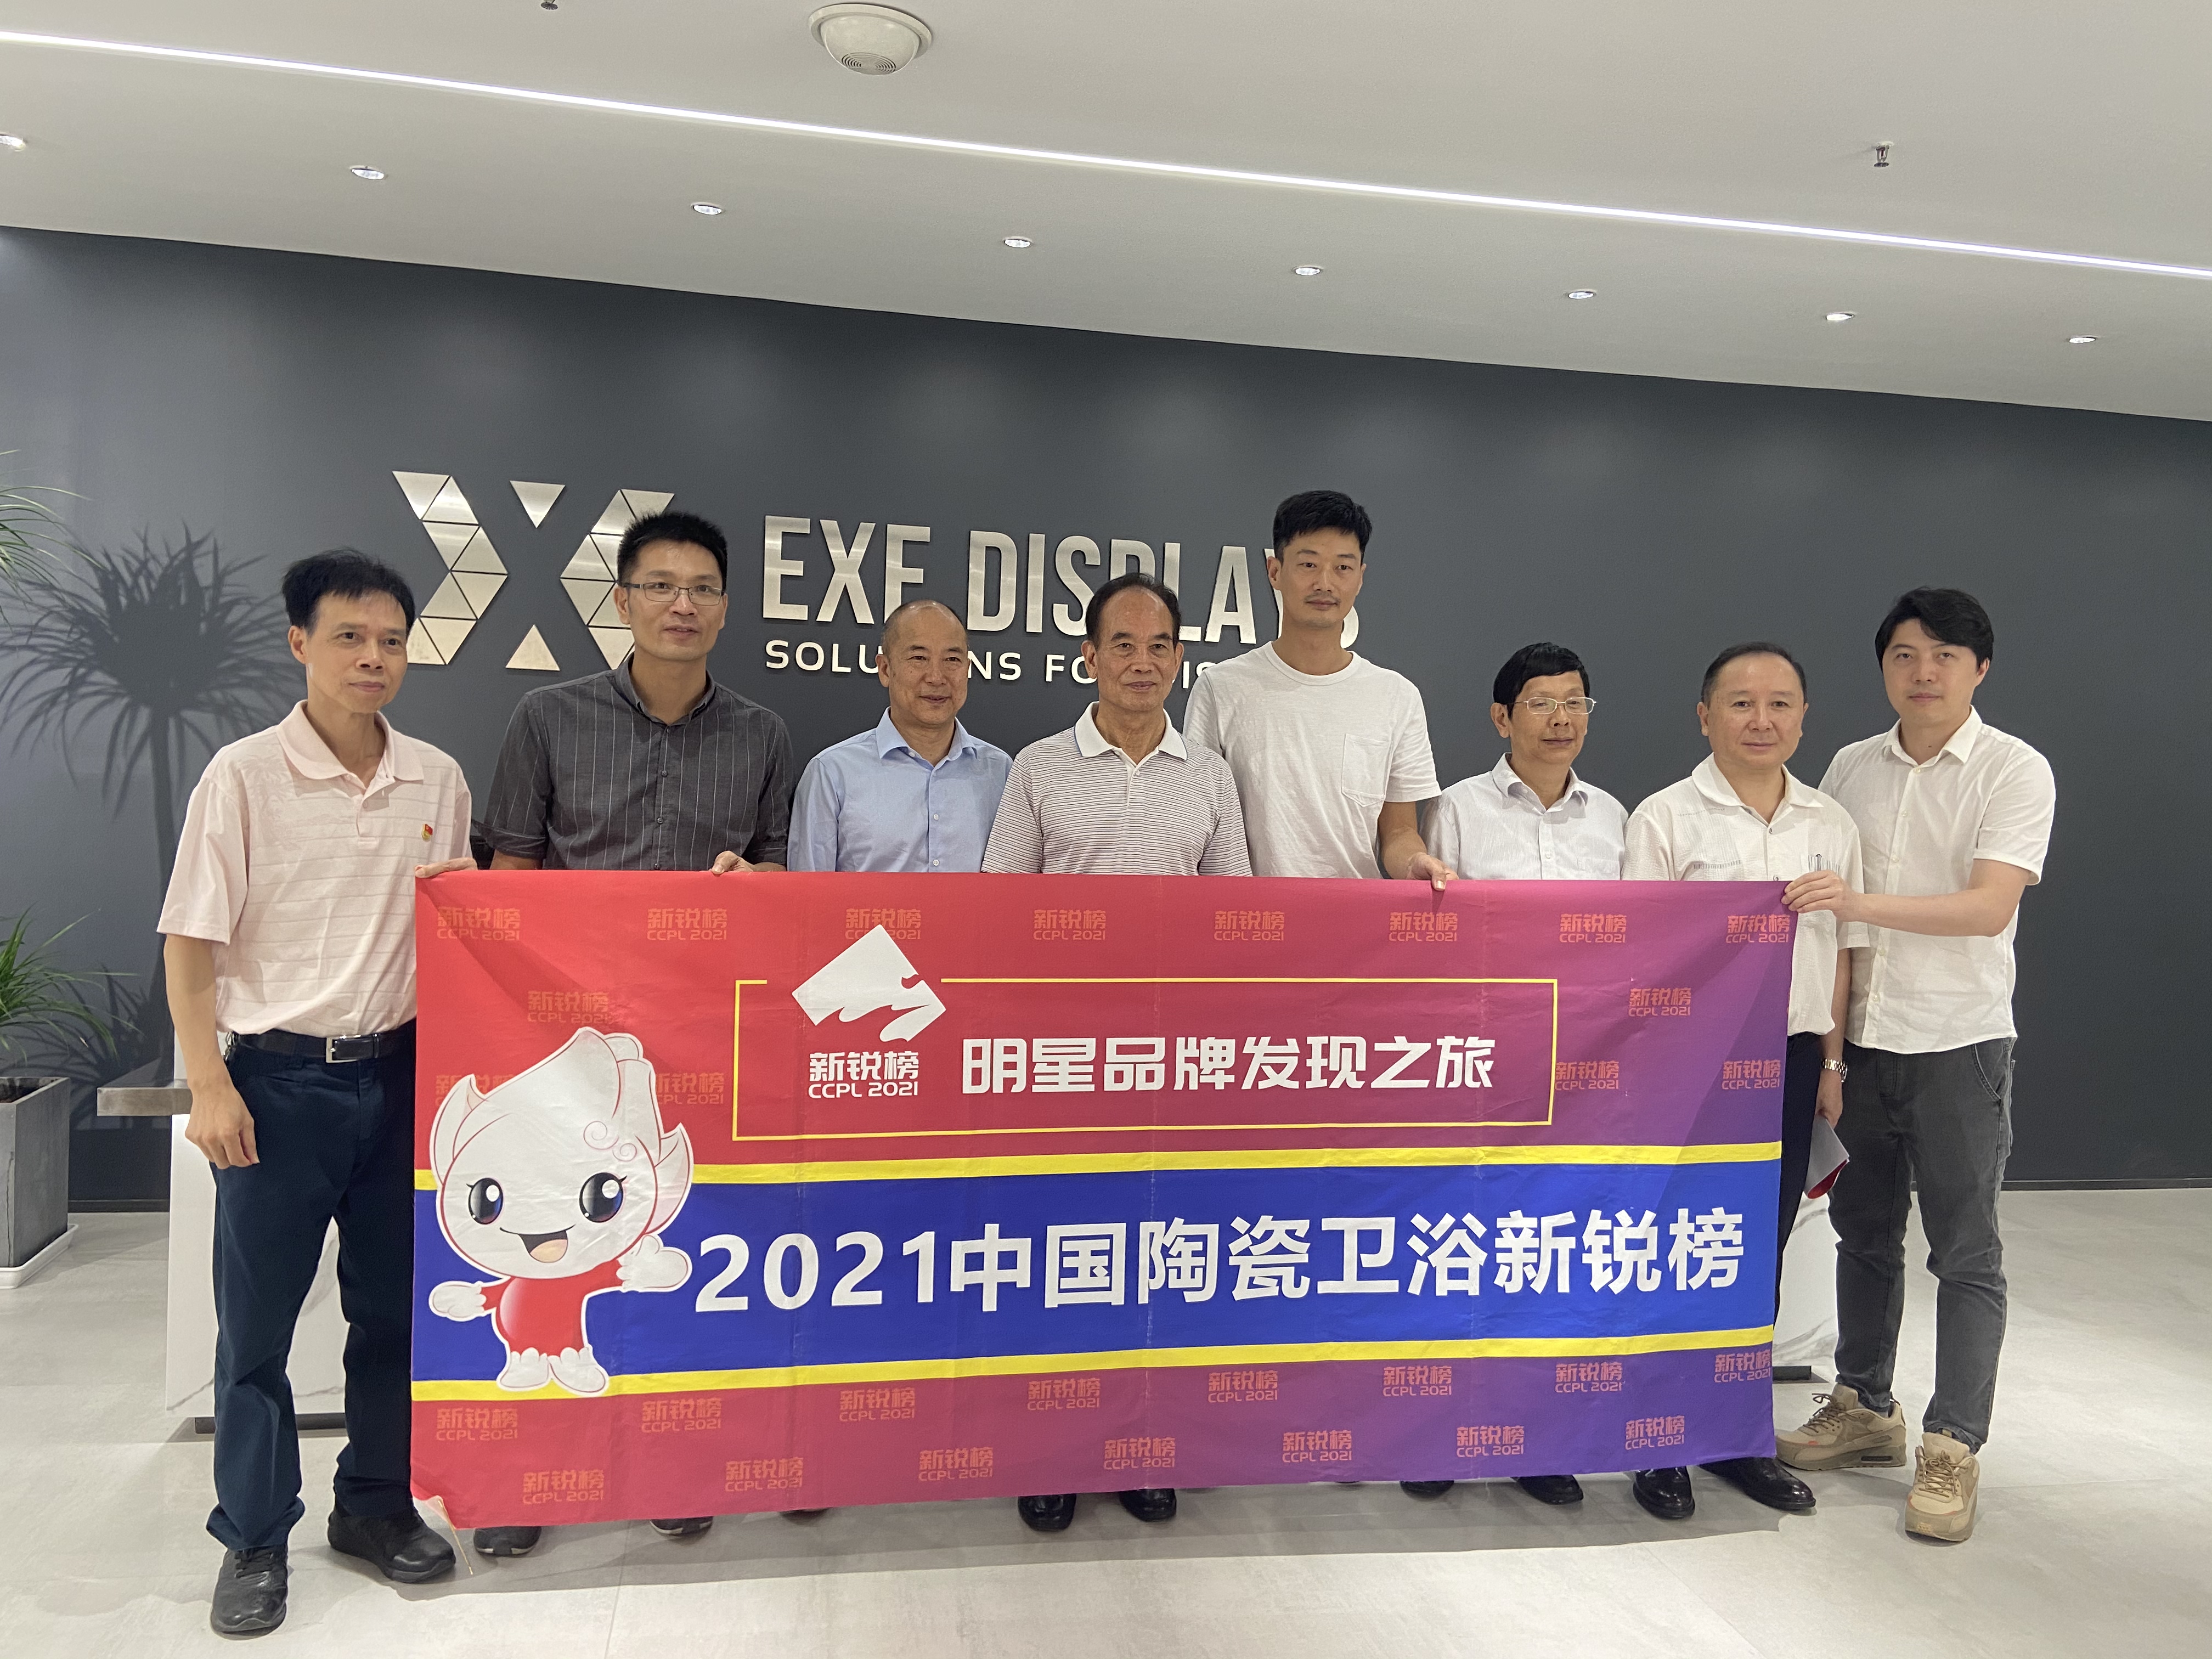 Exe. Displays Equipment Company in CCPL